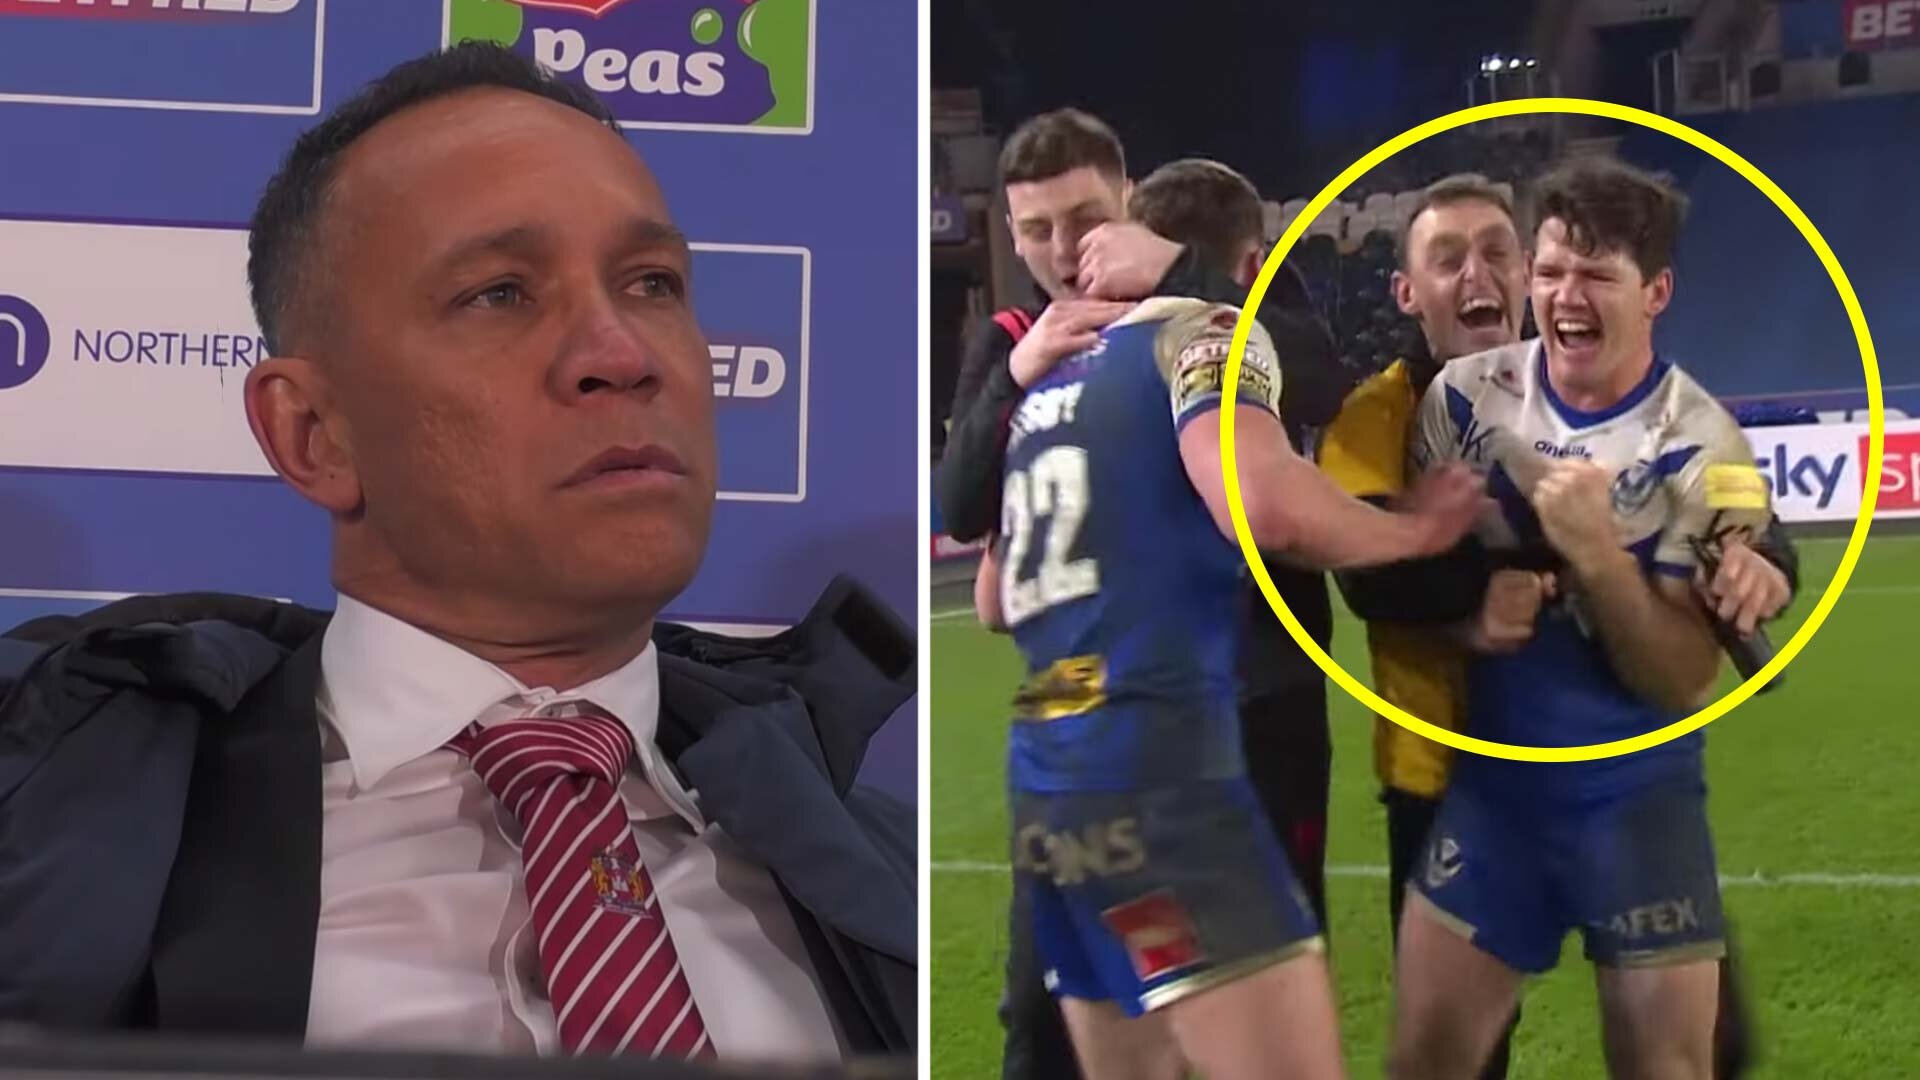 One of the craziest finishes ever just happened in the final of the Rugby League over the weekend